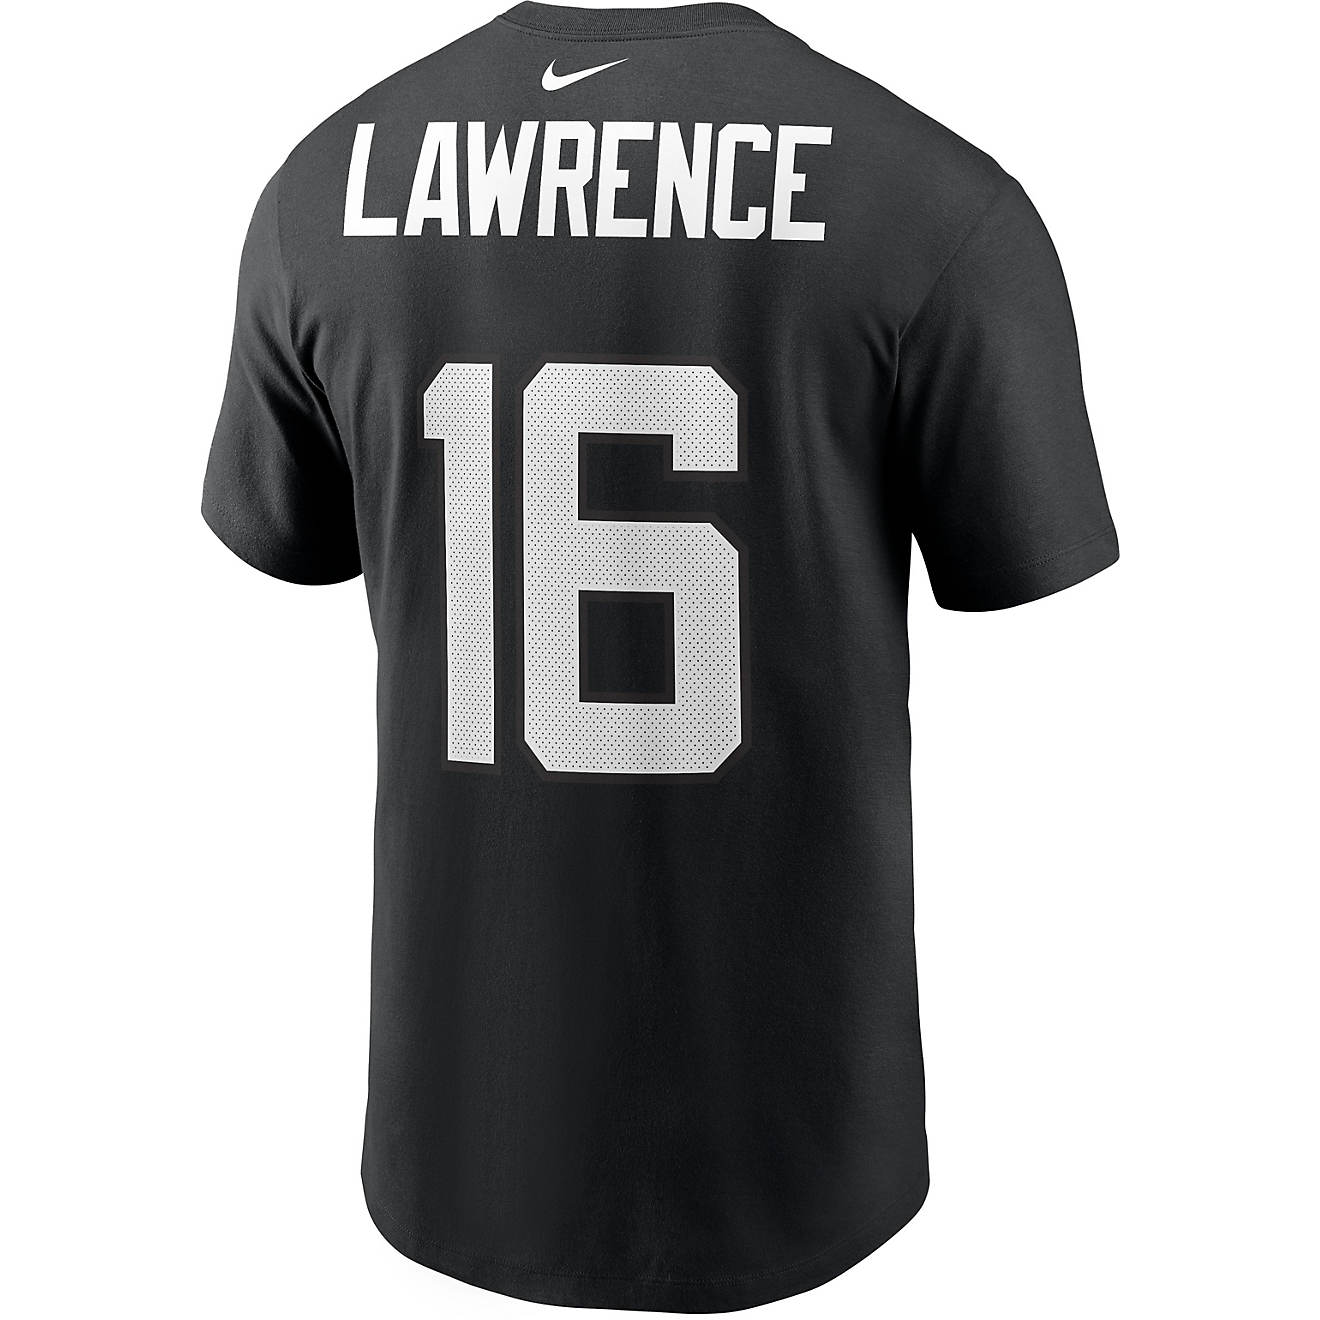 Nike Men's Jacksonville Jaguars Lawrence Name and Number Graphic T-shirt                                                         - view number 1